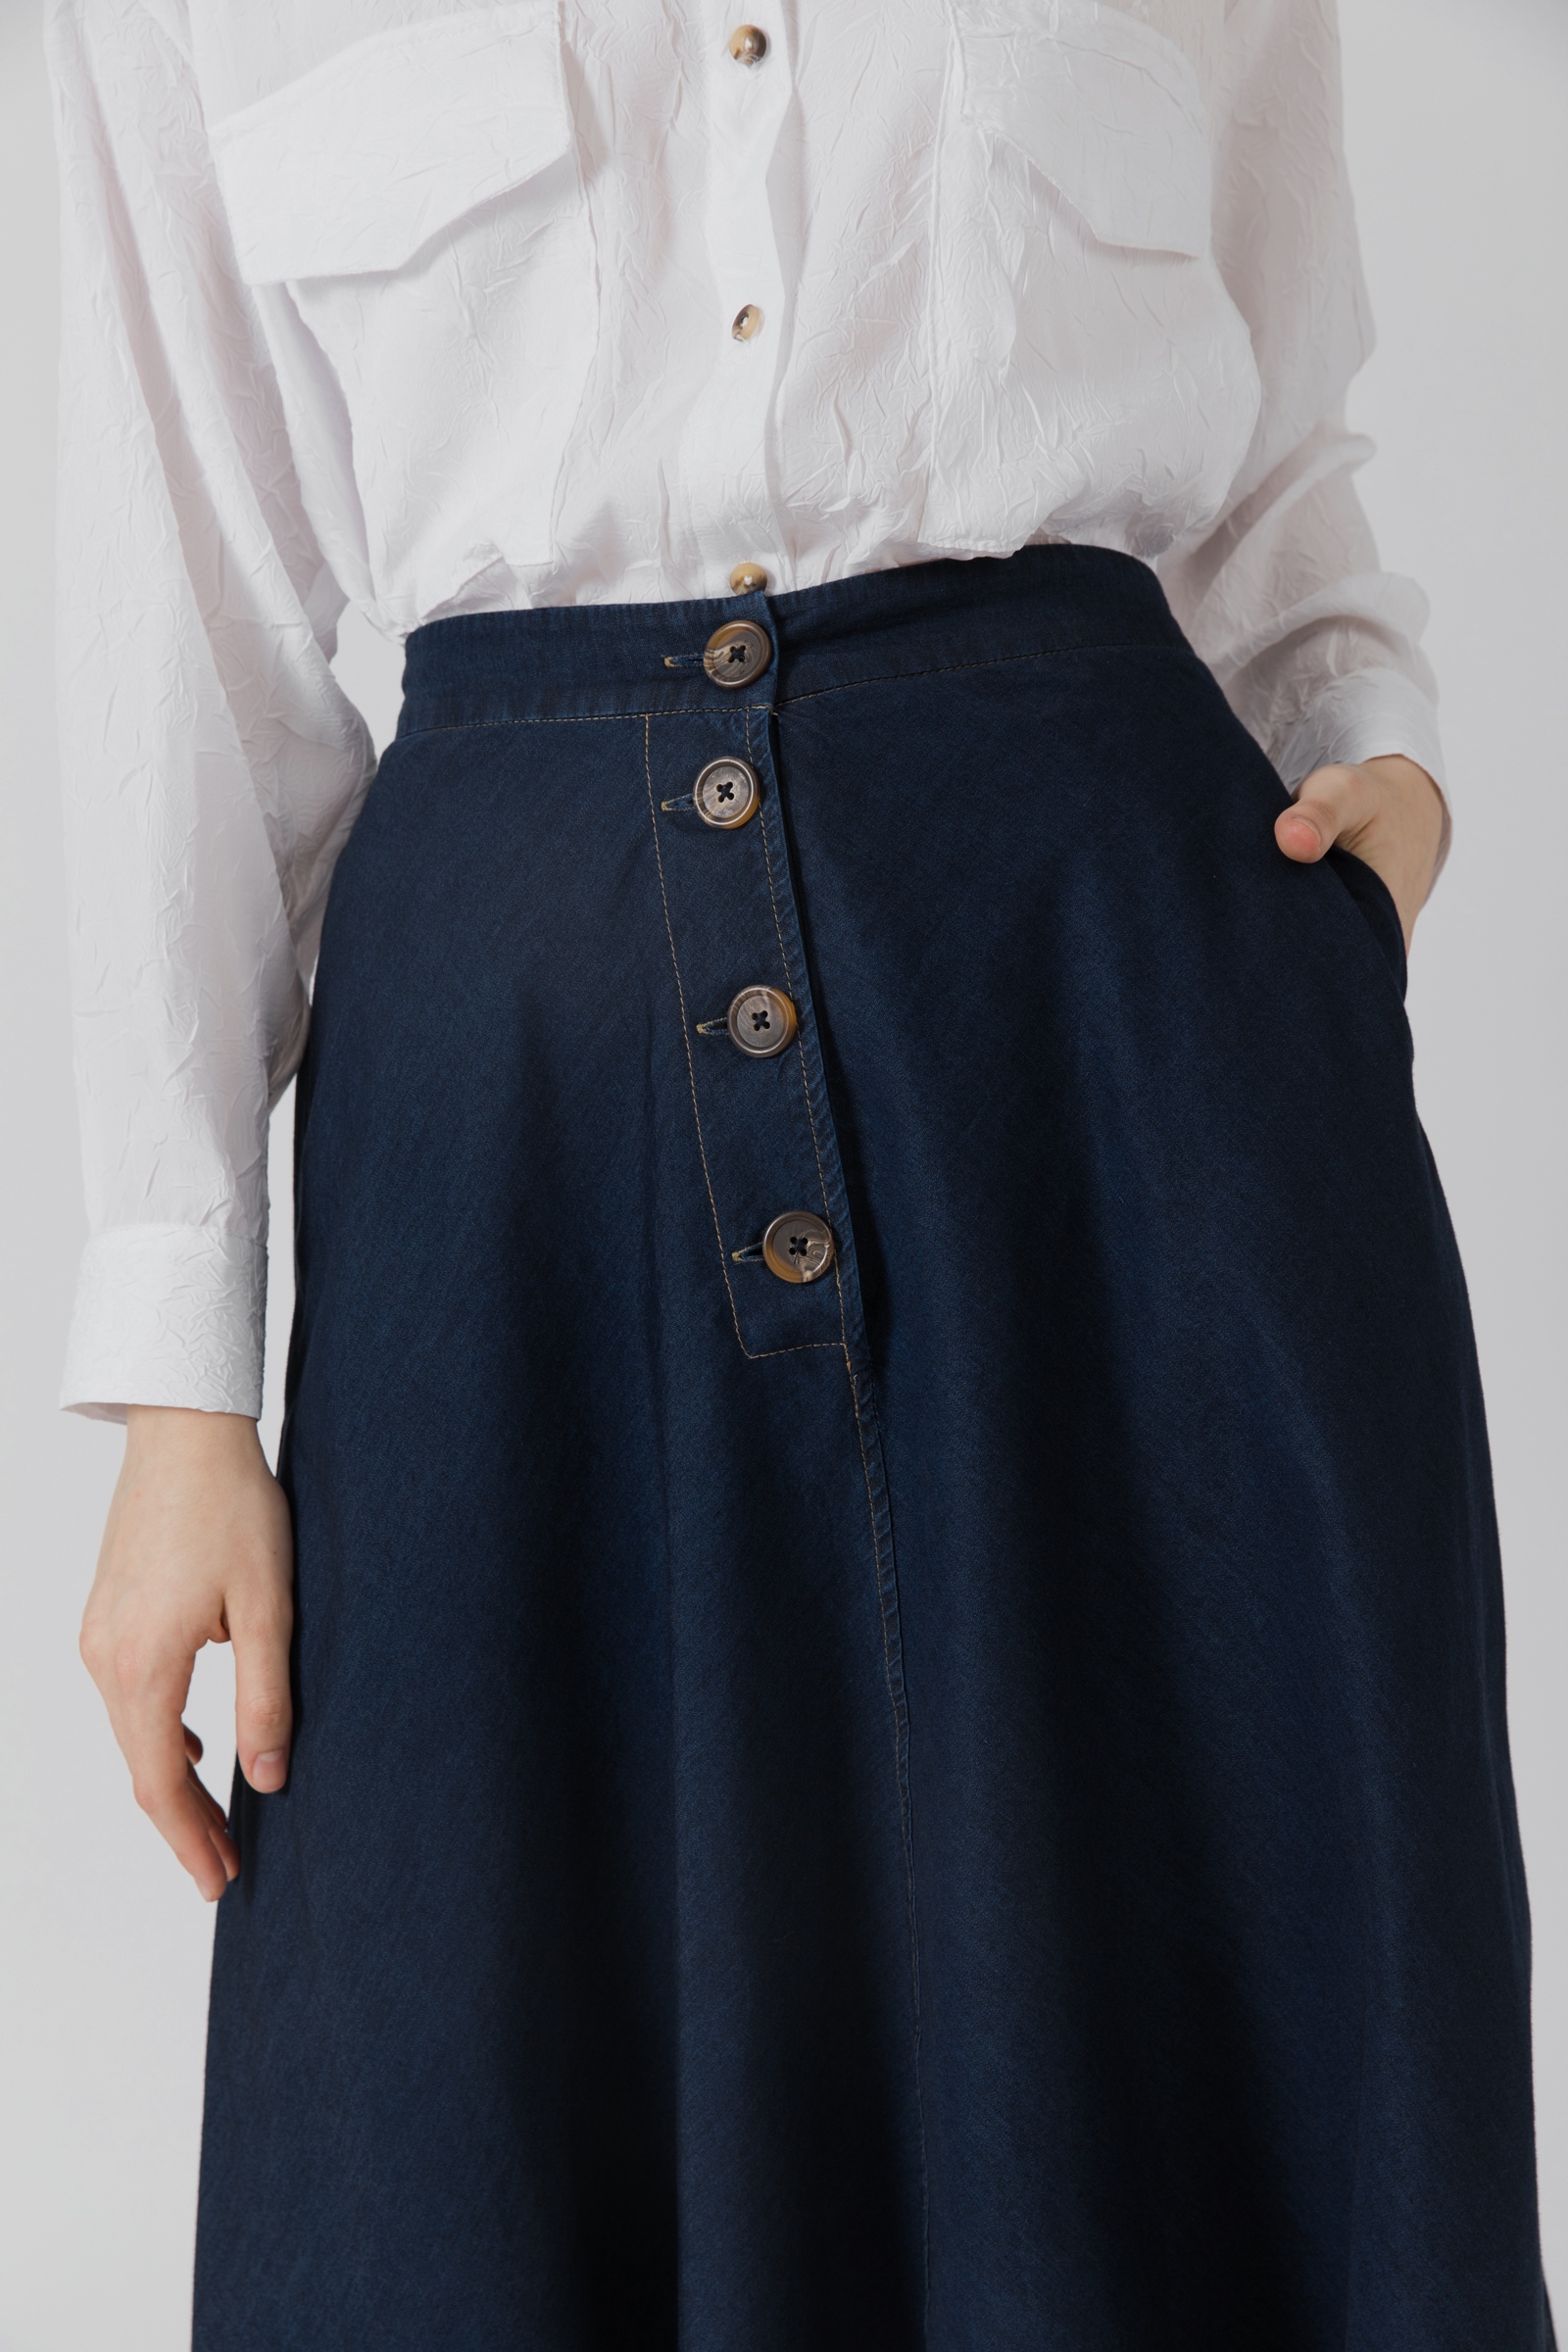 Picture of Artemia Jeans Skirt